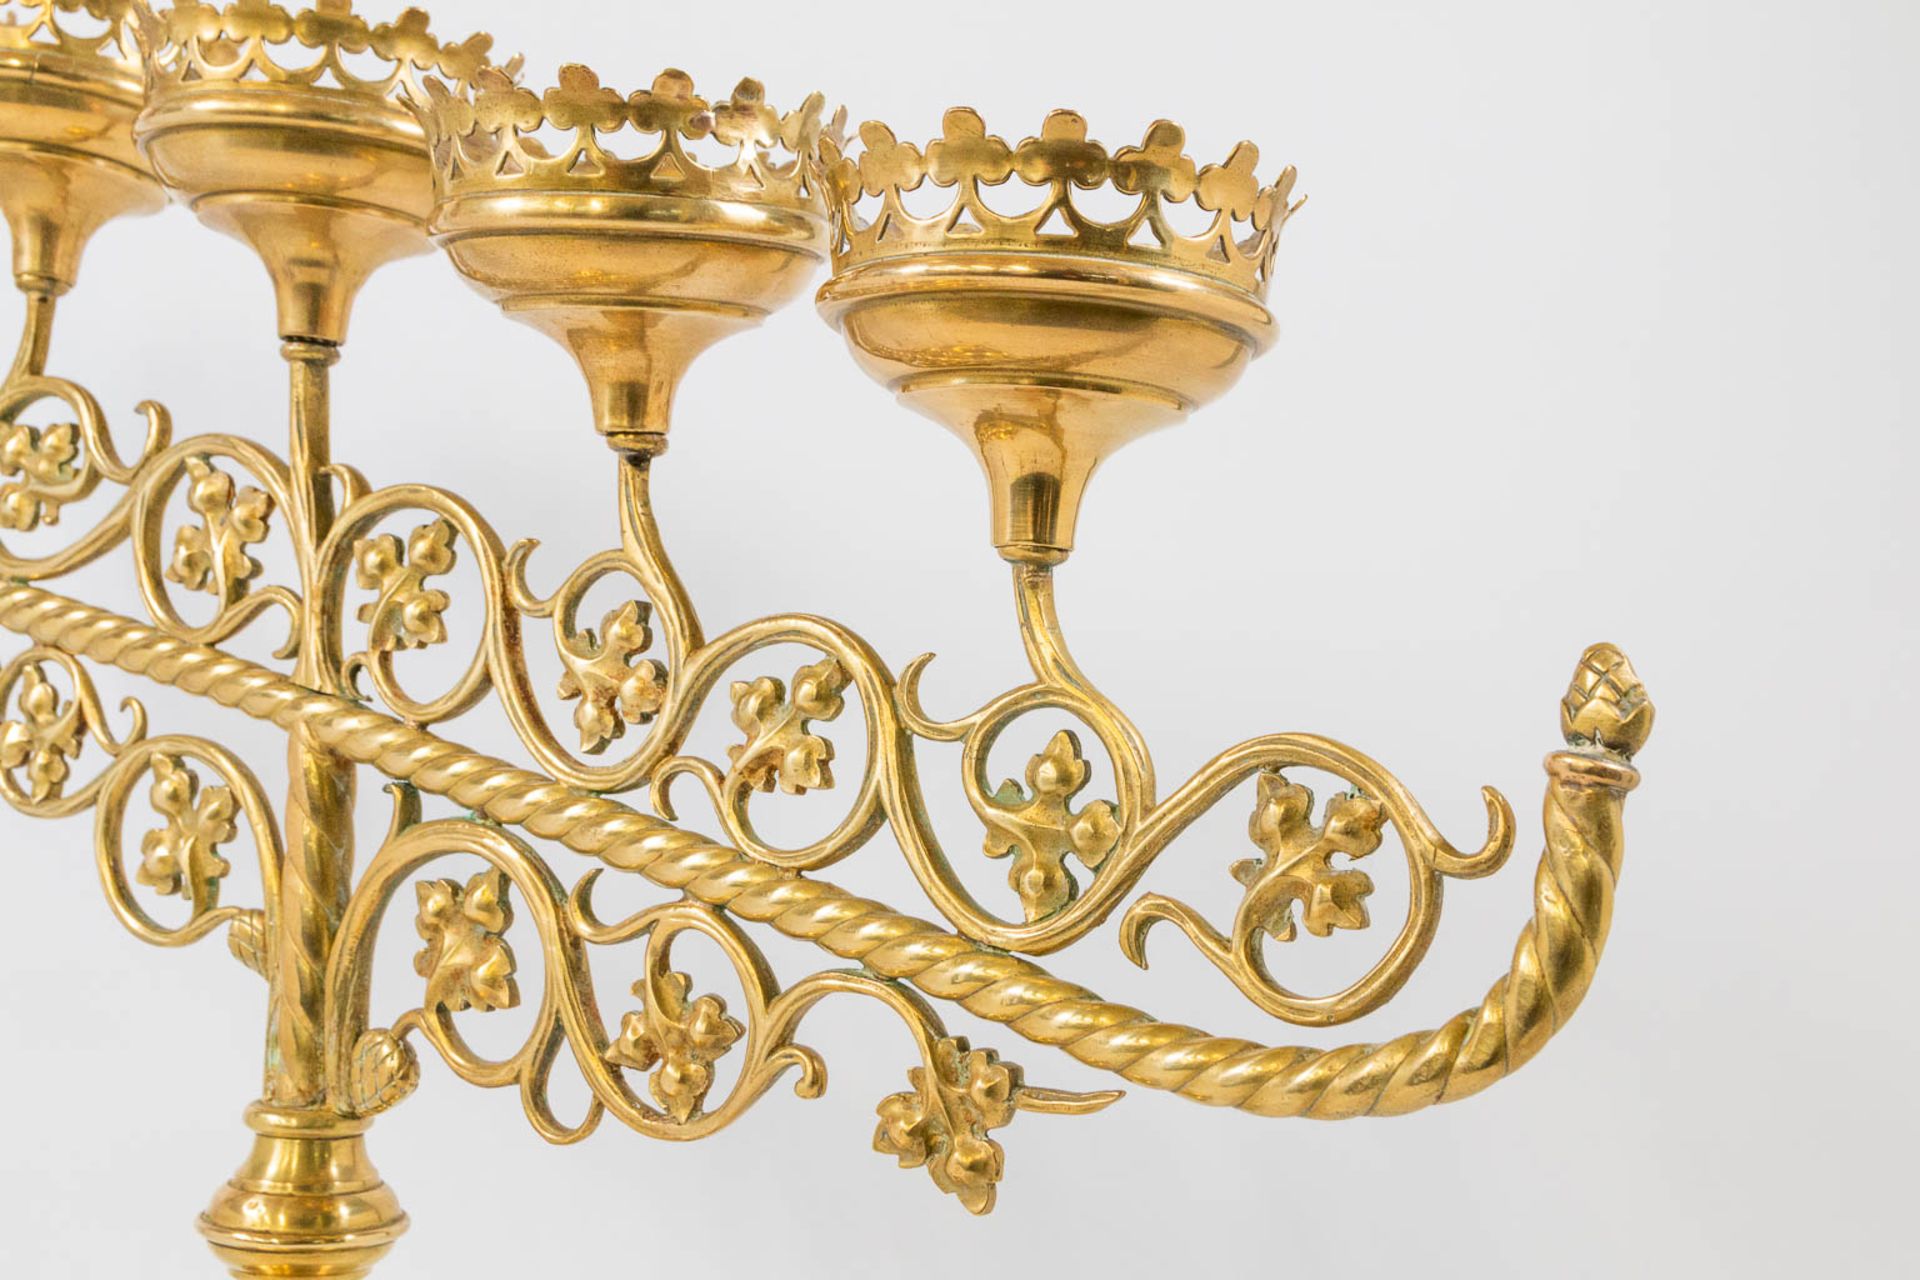 An Antique brass church candelabra, decorated with grape vine leaves and standing on claw feet, Fran - Image 21 of 22